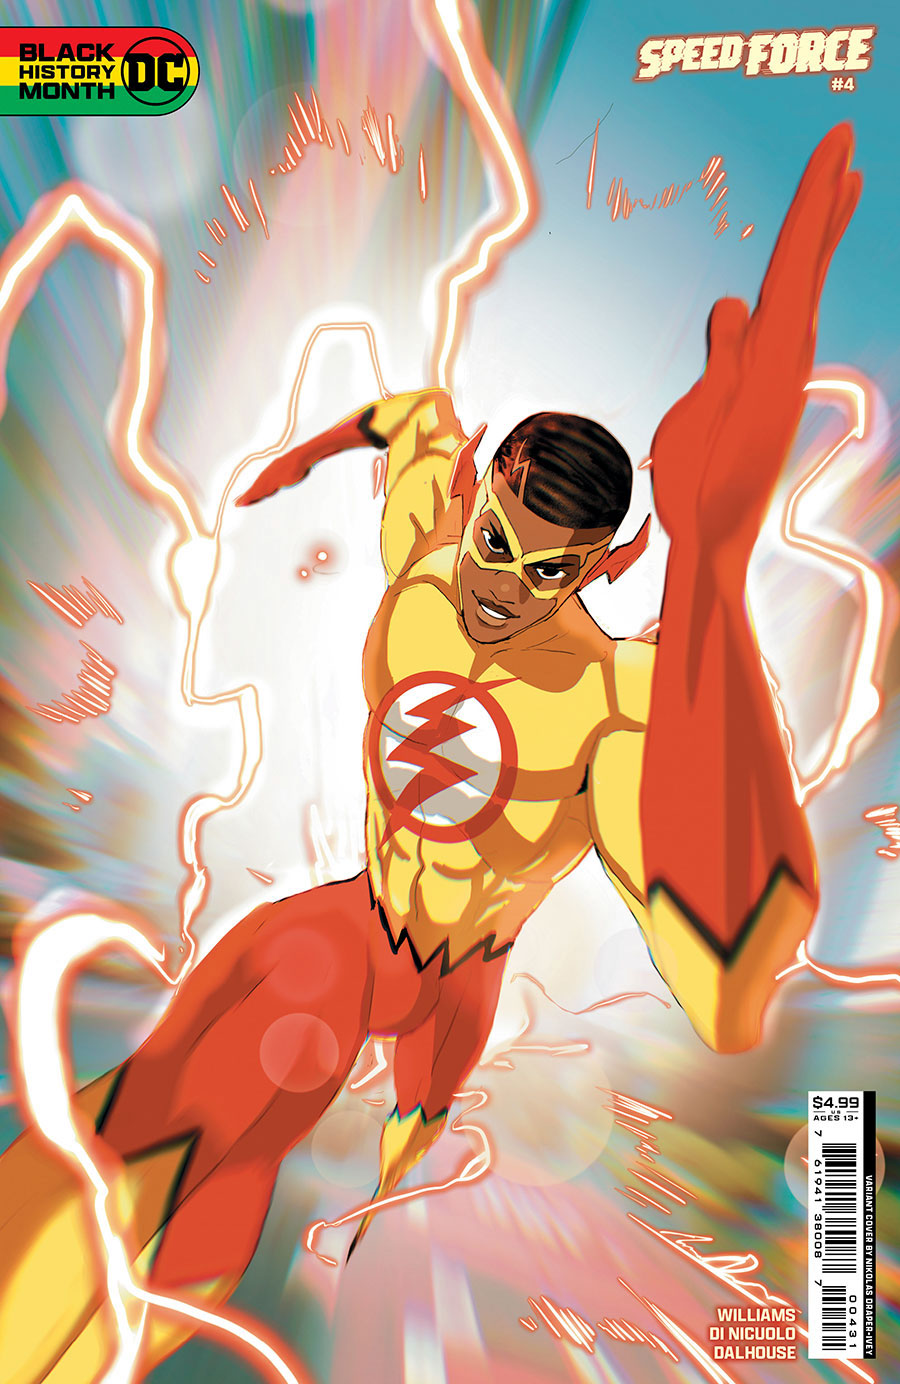 Speed Force #4 Cover C Variant Nikolas Draper-Ivey Black History Month Card Stock Cover